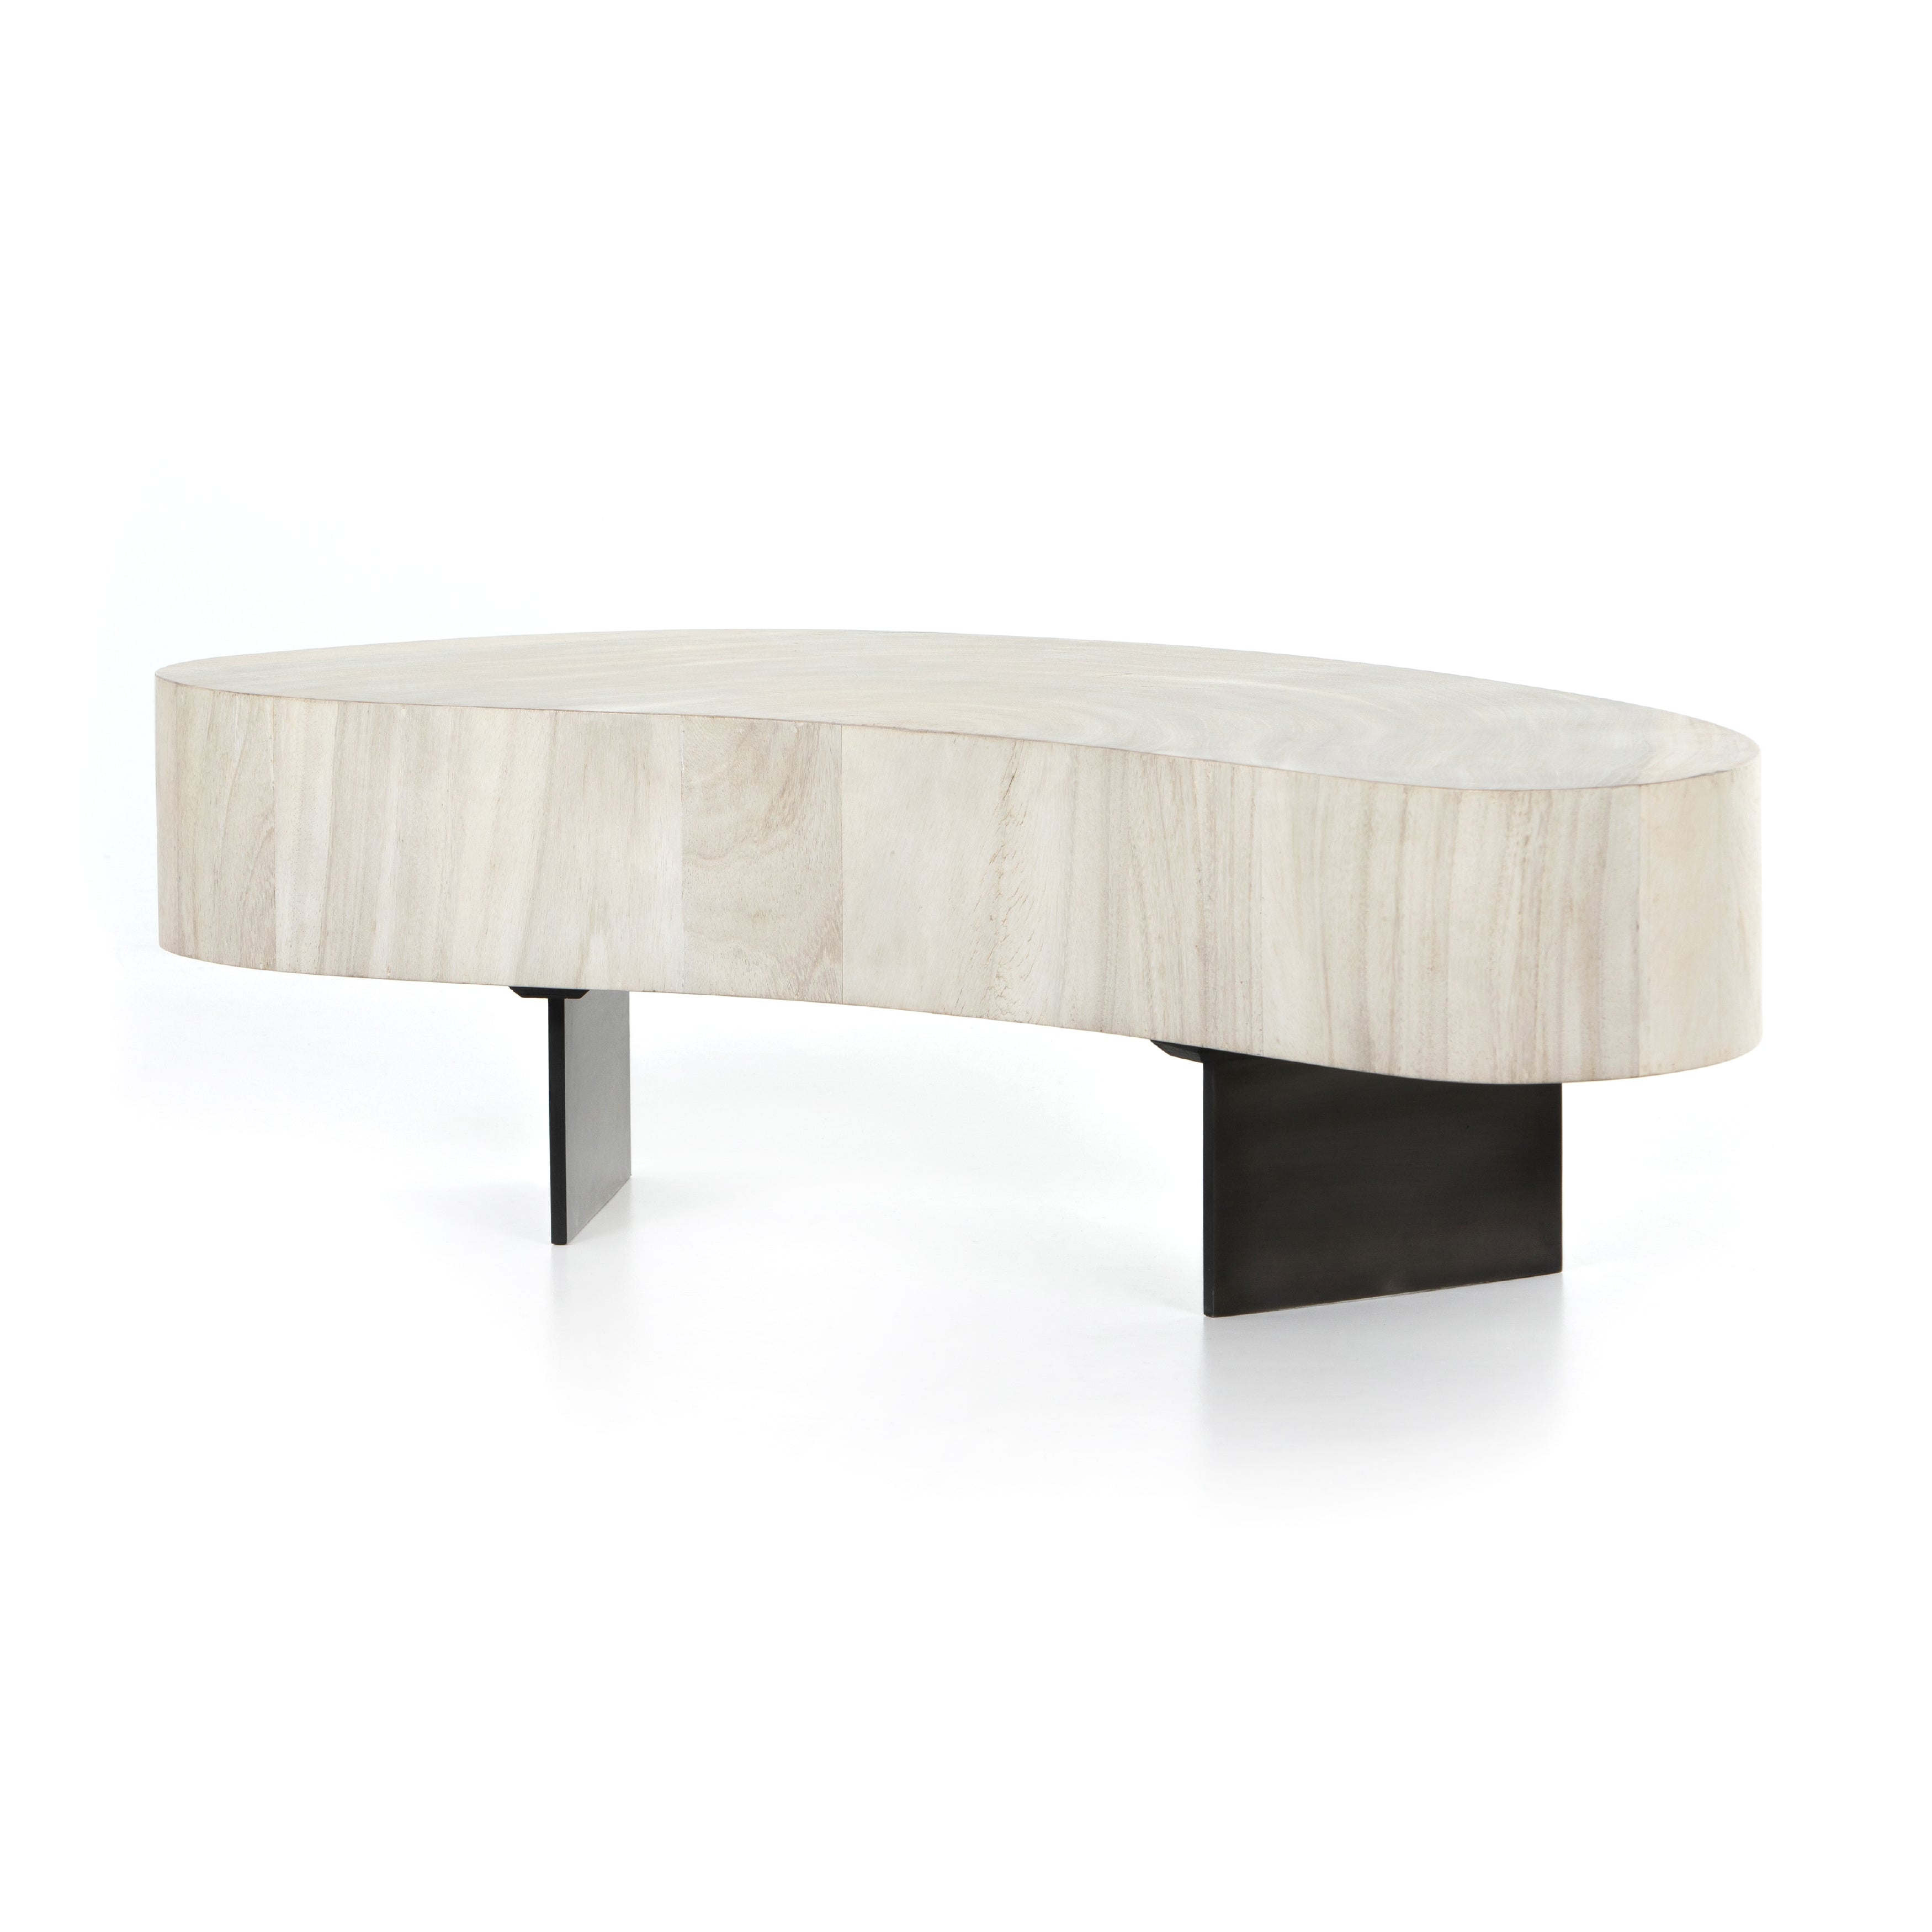 Natural beauty - total novelty. A thick slab of bleached, oyster-cut Guanacaste forms a tall, kidney-shaped coffee table. Visible rings speak to woods' natural graining, while a dark gunmetal-finished base provides clean contrast to the whole look. Amethyst Home provides interior design, new construction, custom furniture, and area rugs in the Miami metro area.